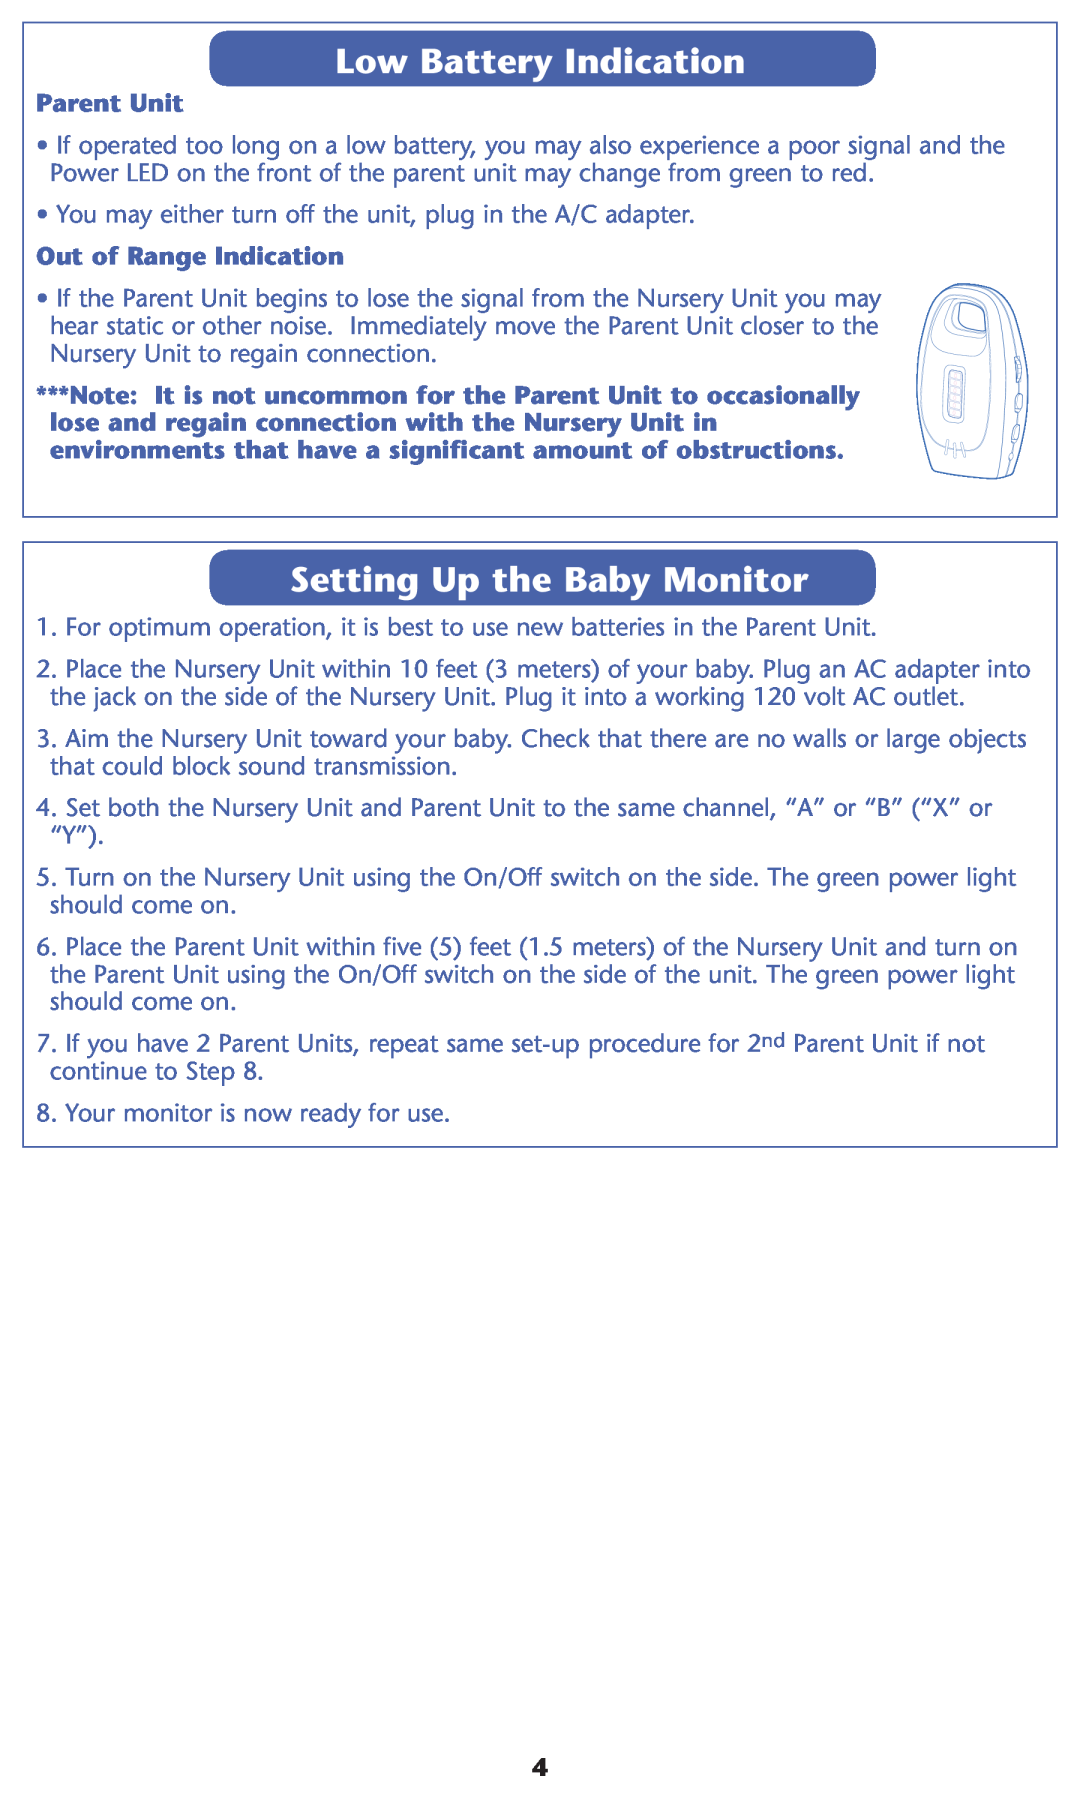 Graco 2L02VIB, 2L01VIB warranty Low Battery Indication, Setting Up the Baby Monitor, Parent Unit, Out of Range Indication 